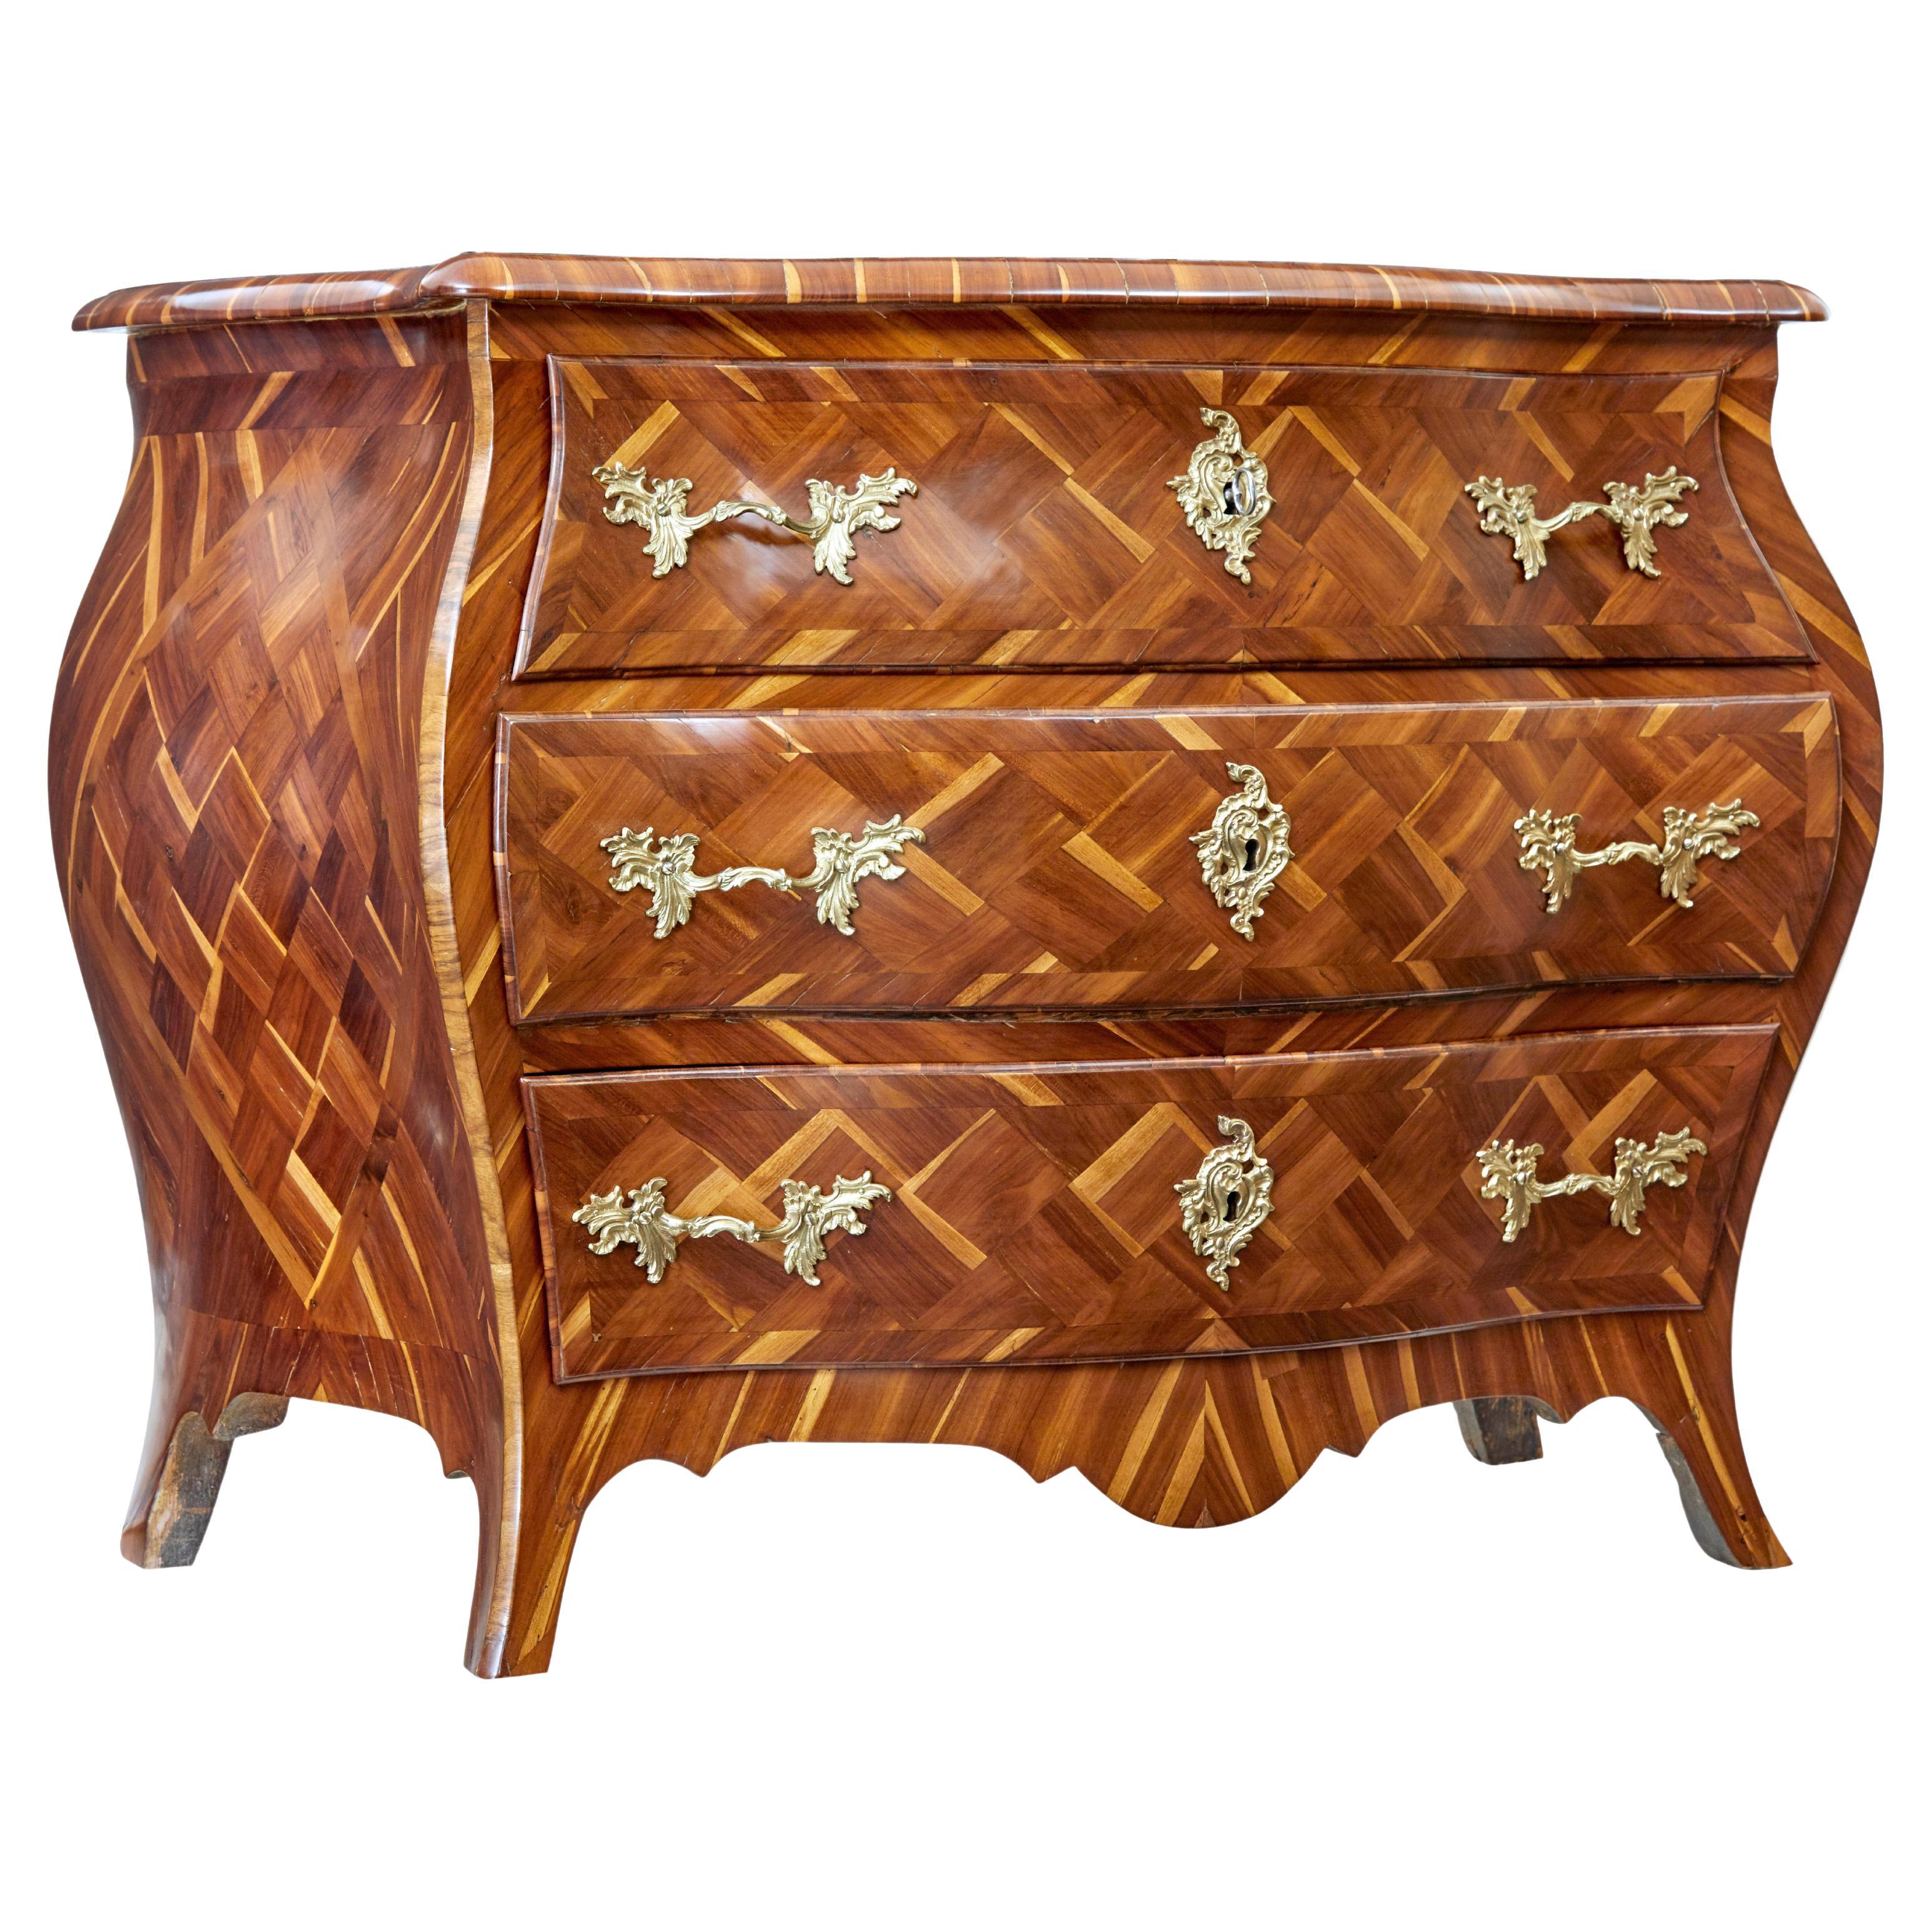 Early 18th Century rococo inlaid plum bombe chest of drawers